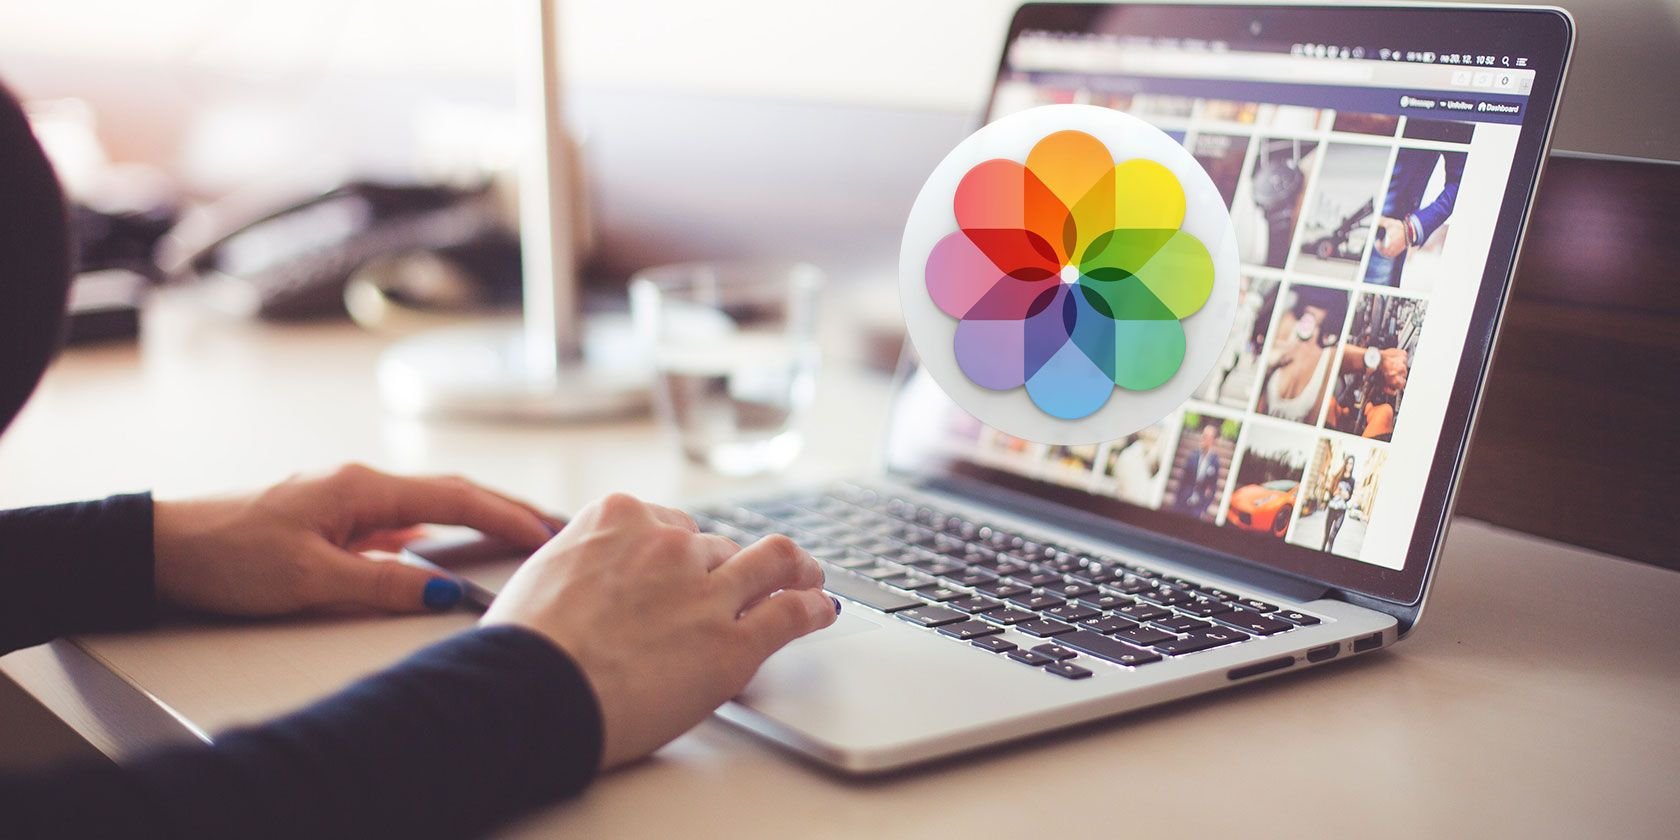 8 Starter Tips for Managing Your Photos Library on Mac